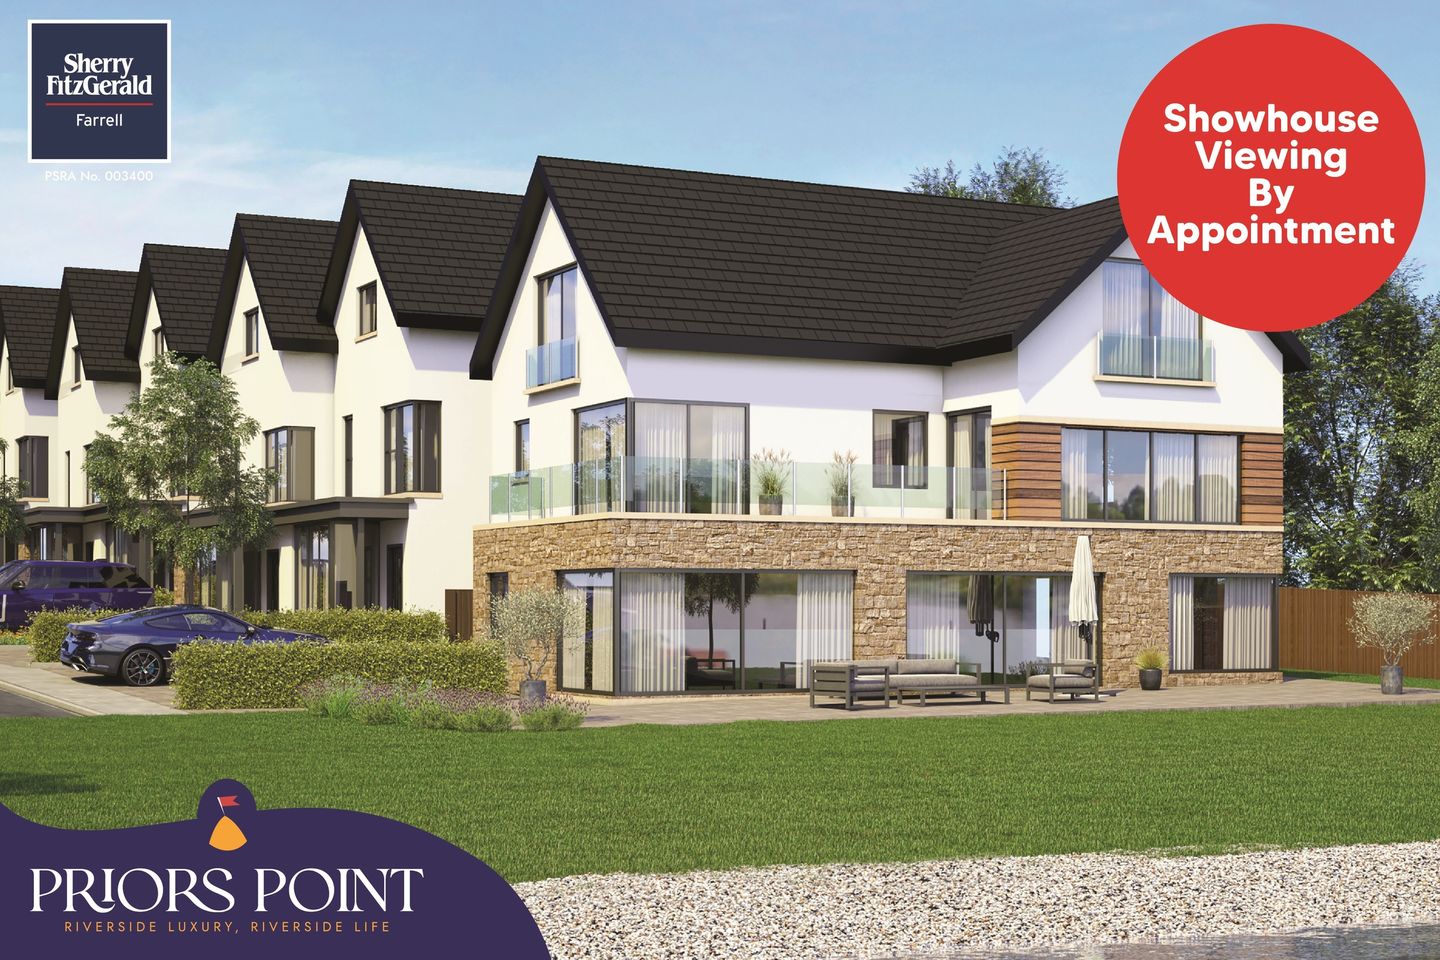 Type G - 1 Unit Remaining, Priors Point, Priors Point, Attirory, Carrick-on-Shannon, Co. Leitrim